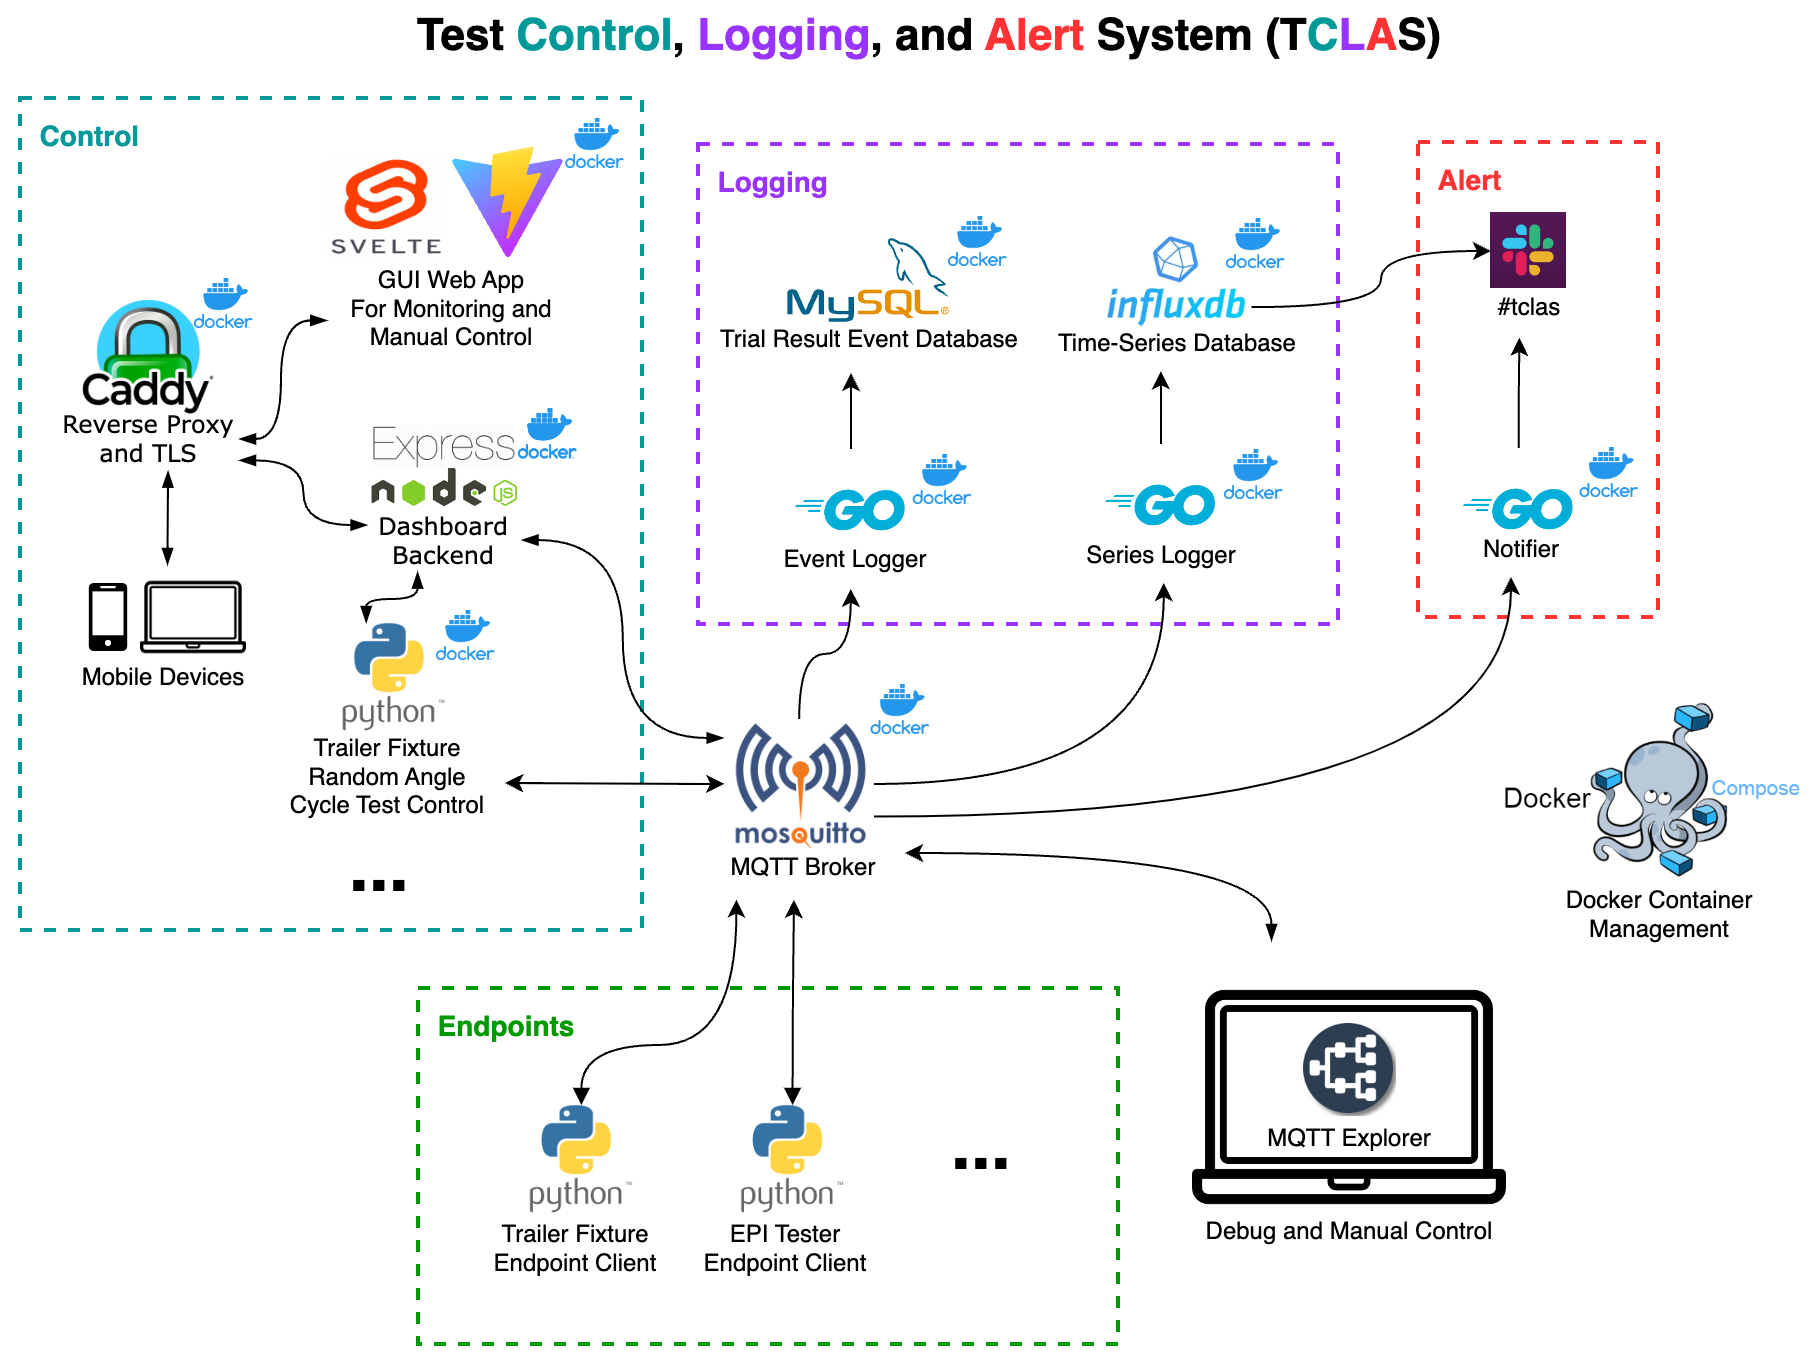 TCLAS: Test Control, Logging, and Alert System summary image